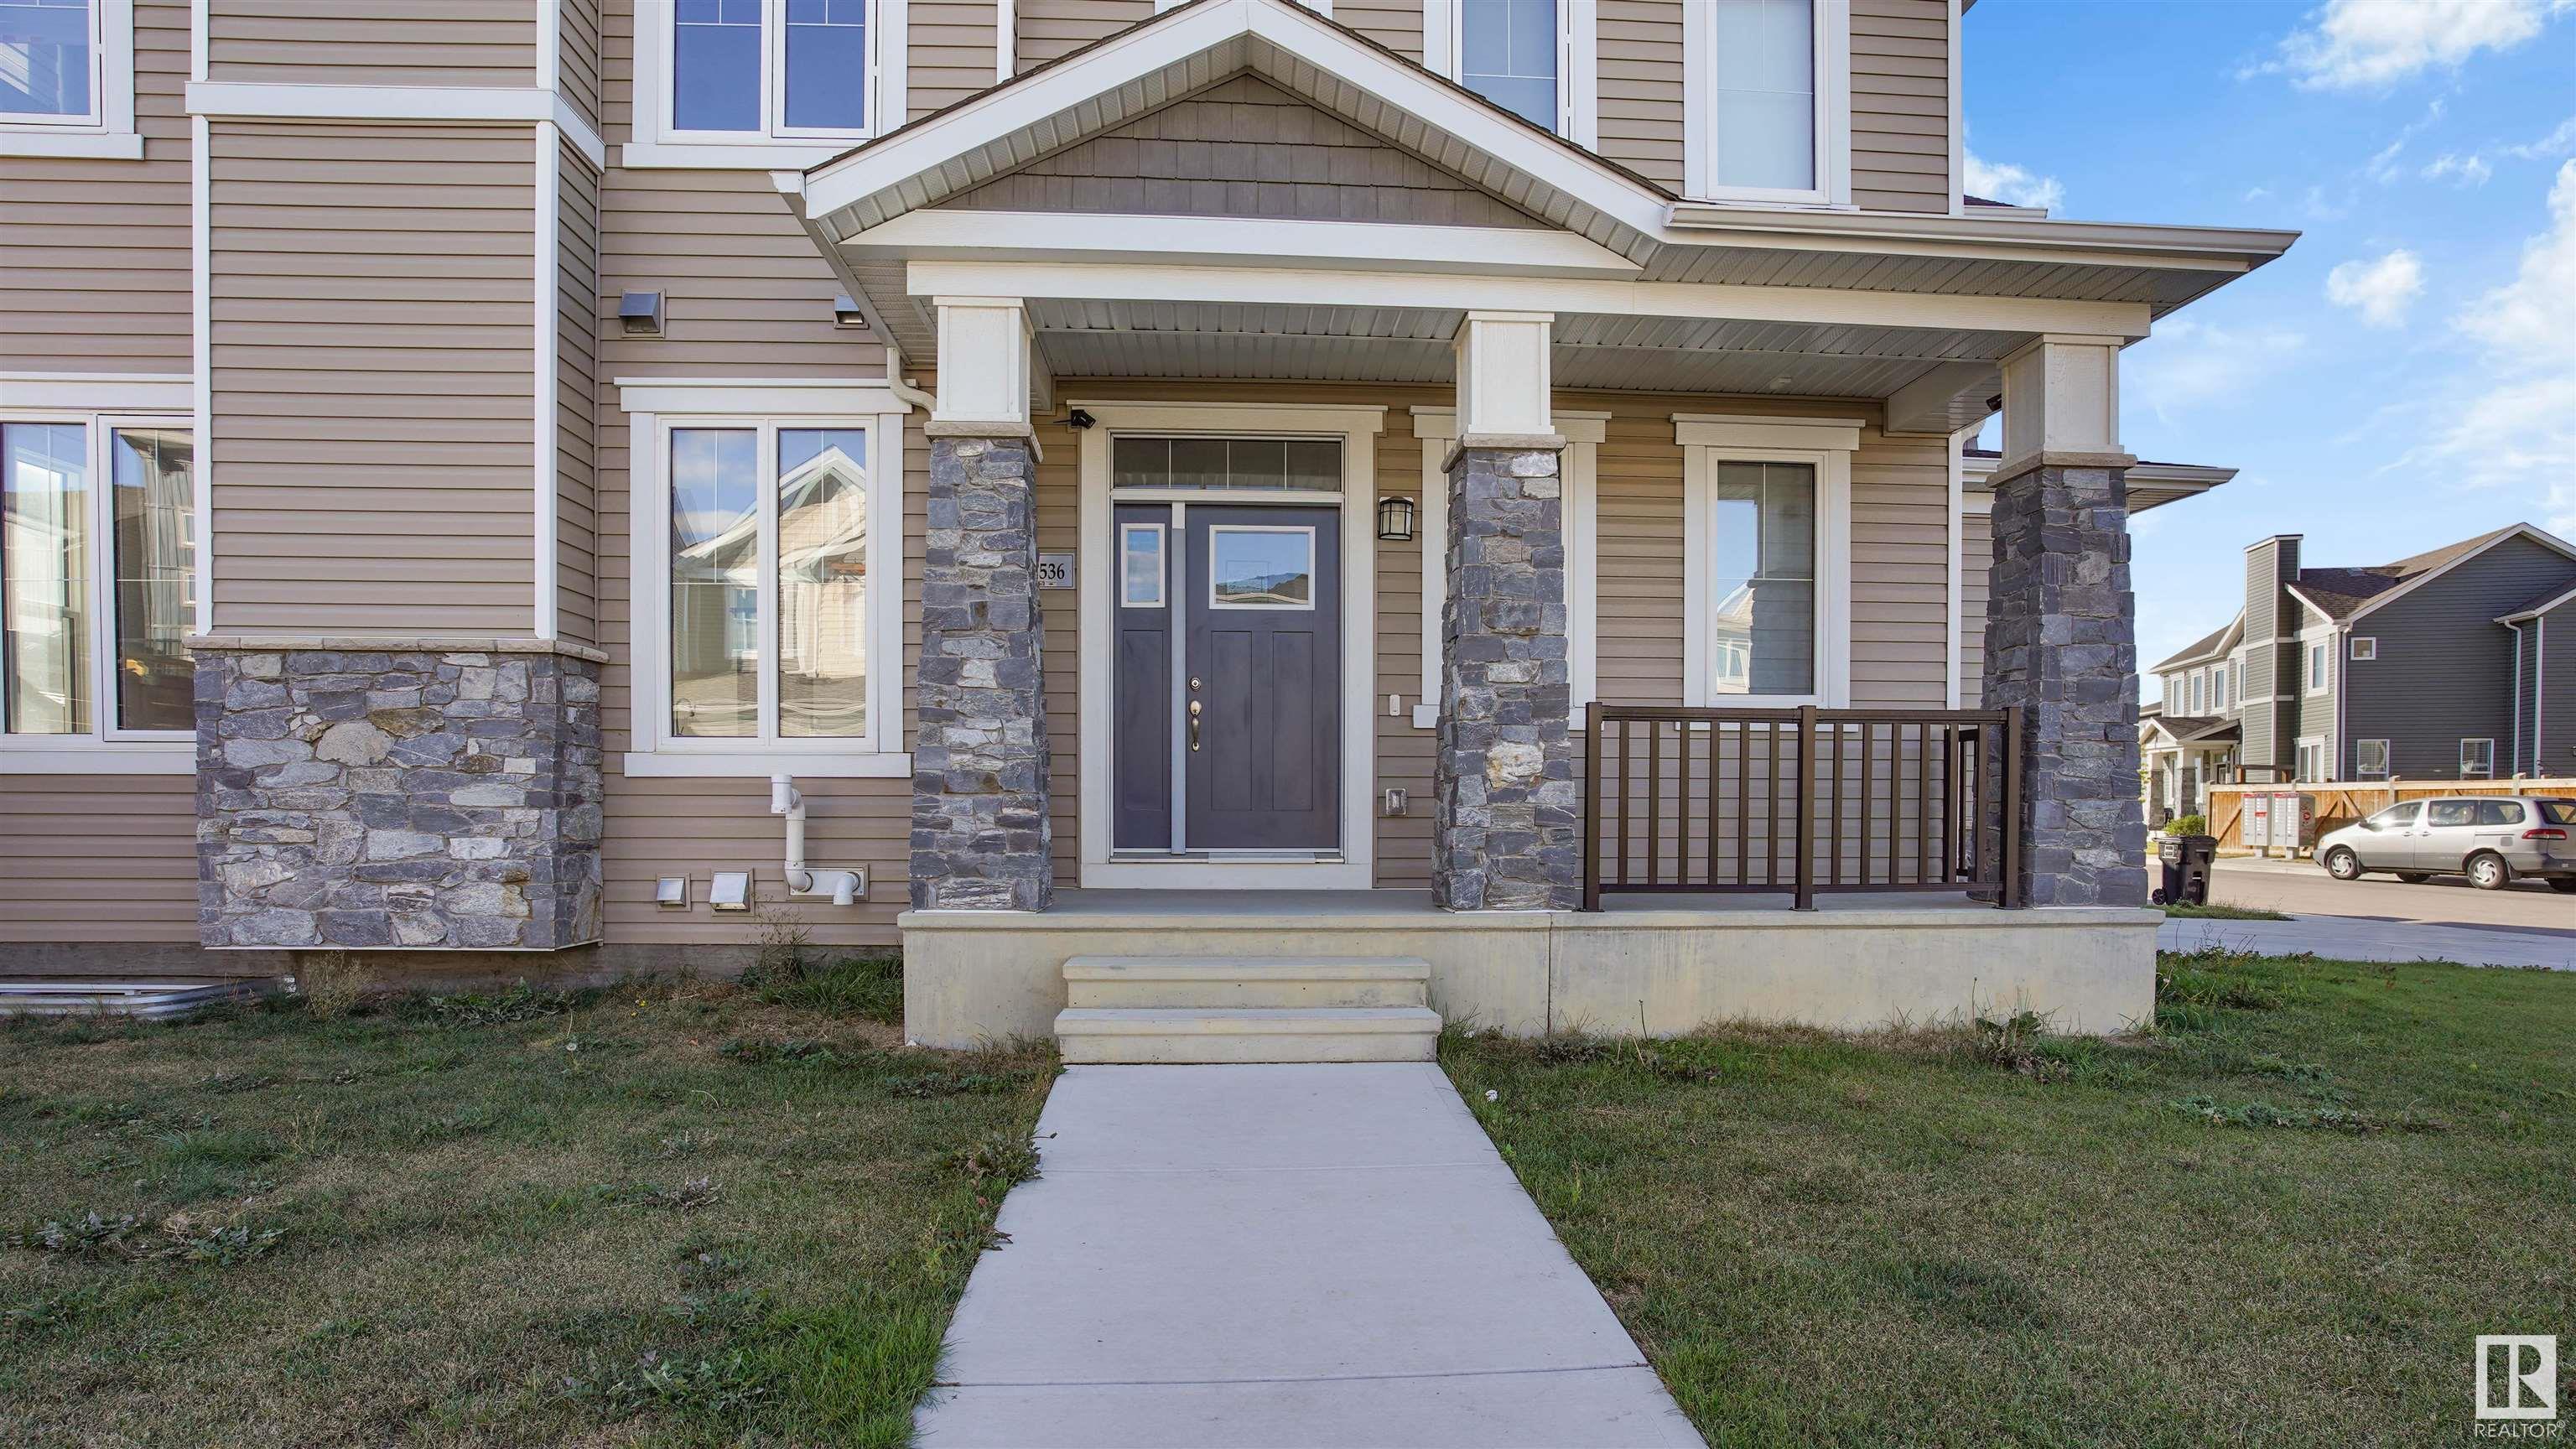      1536 200 ST NW , Edmonton,  ,T6M 0Y3 ;  Listing Number: MLS E4342698